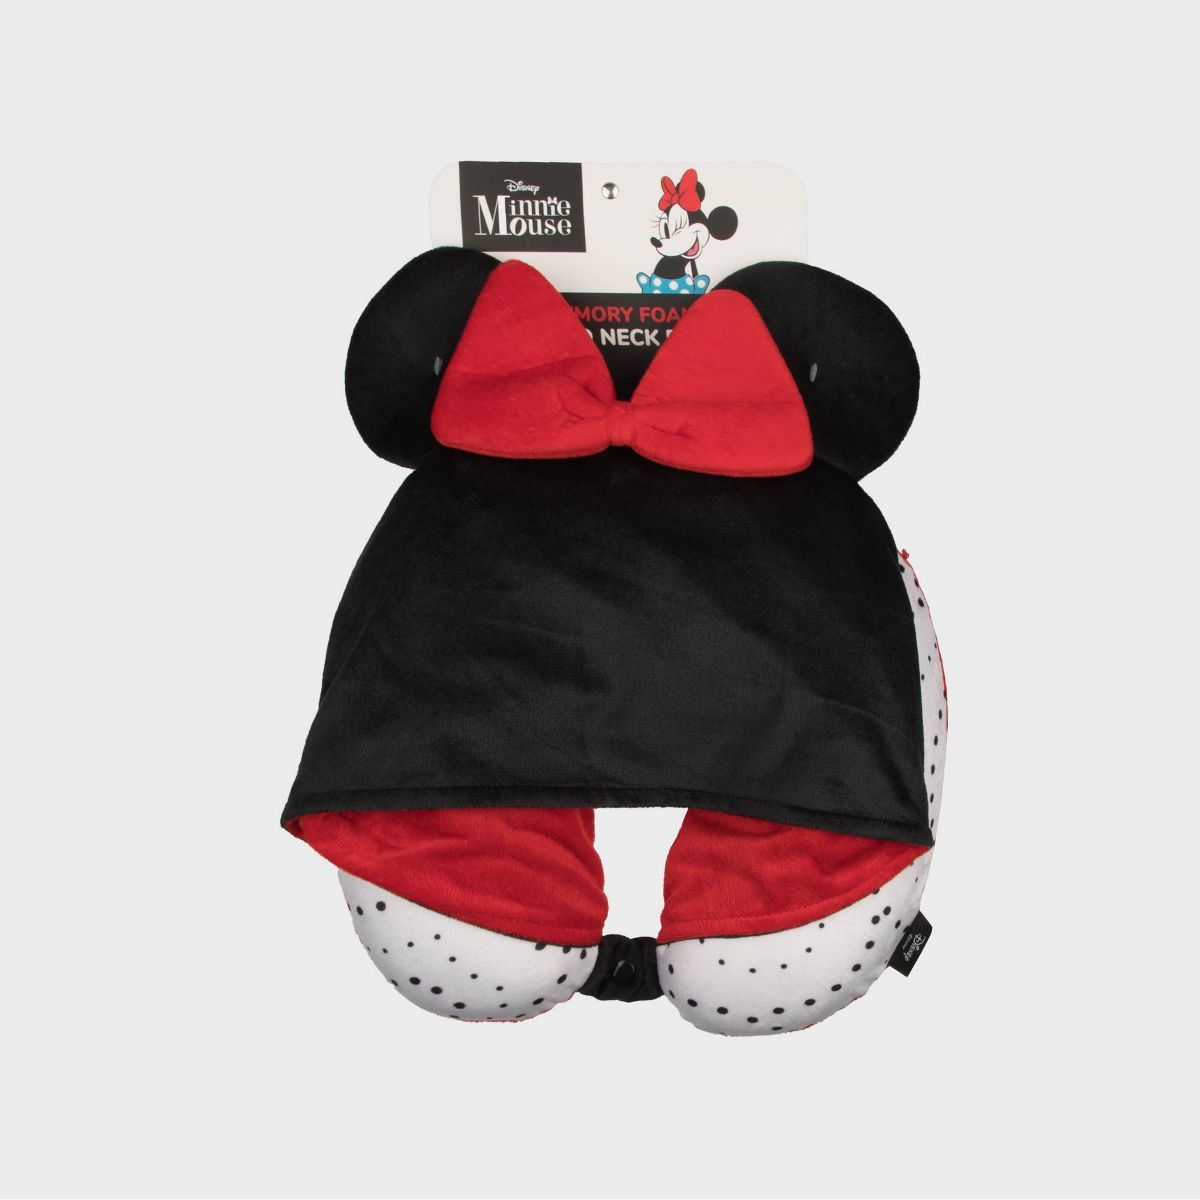 Disney Kids' Minnie Mouse Hooded Neck Pillow | Target